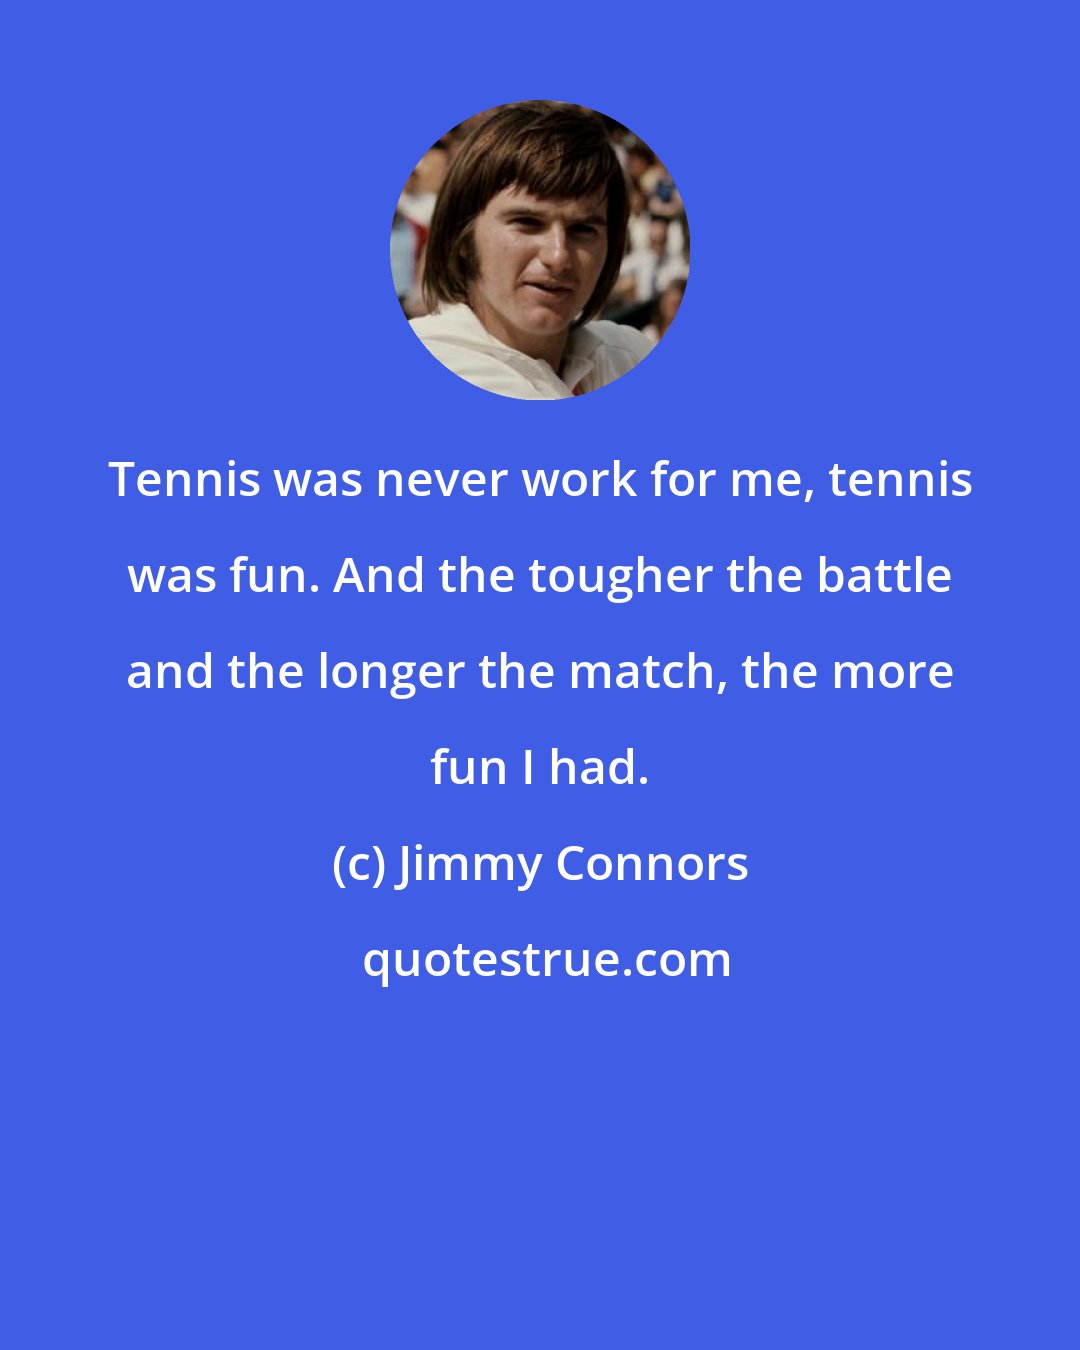 Jimmy Connors: Tennis was never work for me, tennis was fun. And the tougher the battle and the longer the match, the more fun I had.